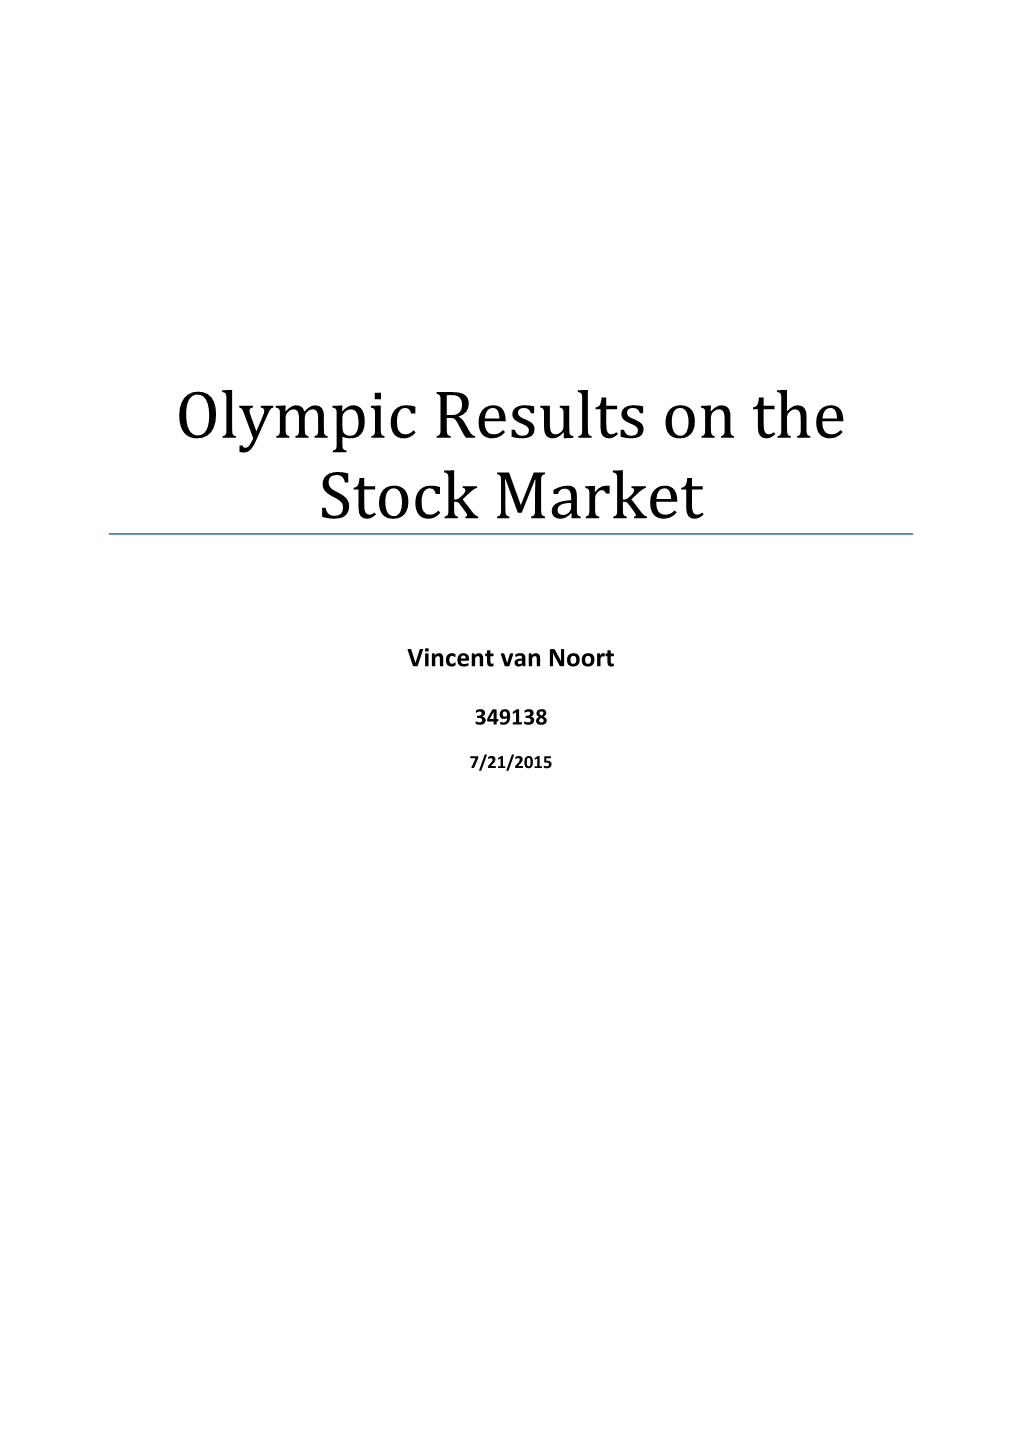 Olympic Results on the Stock Market